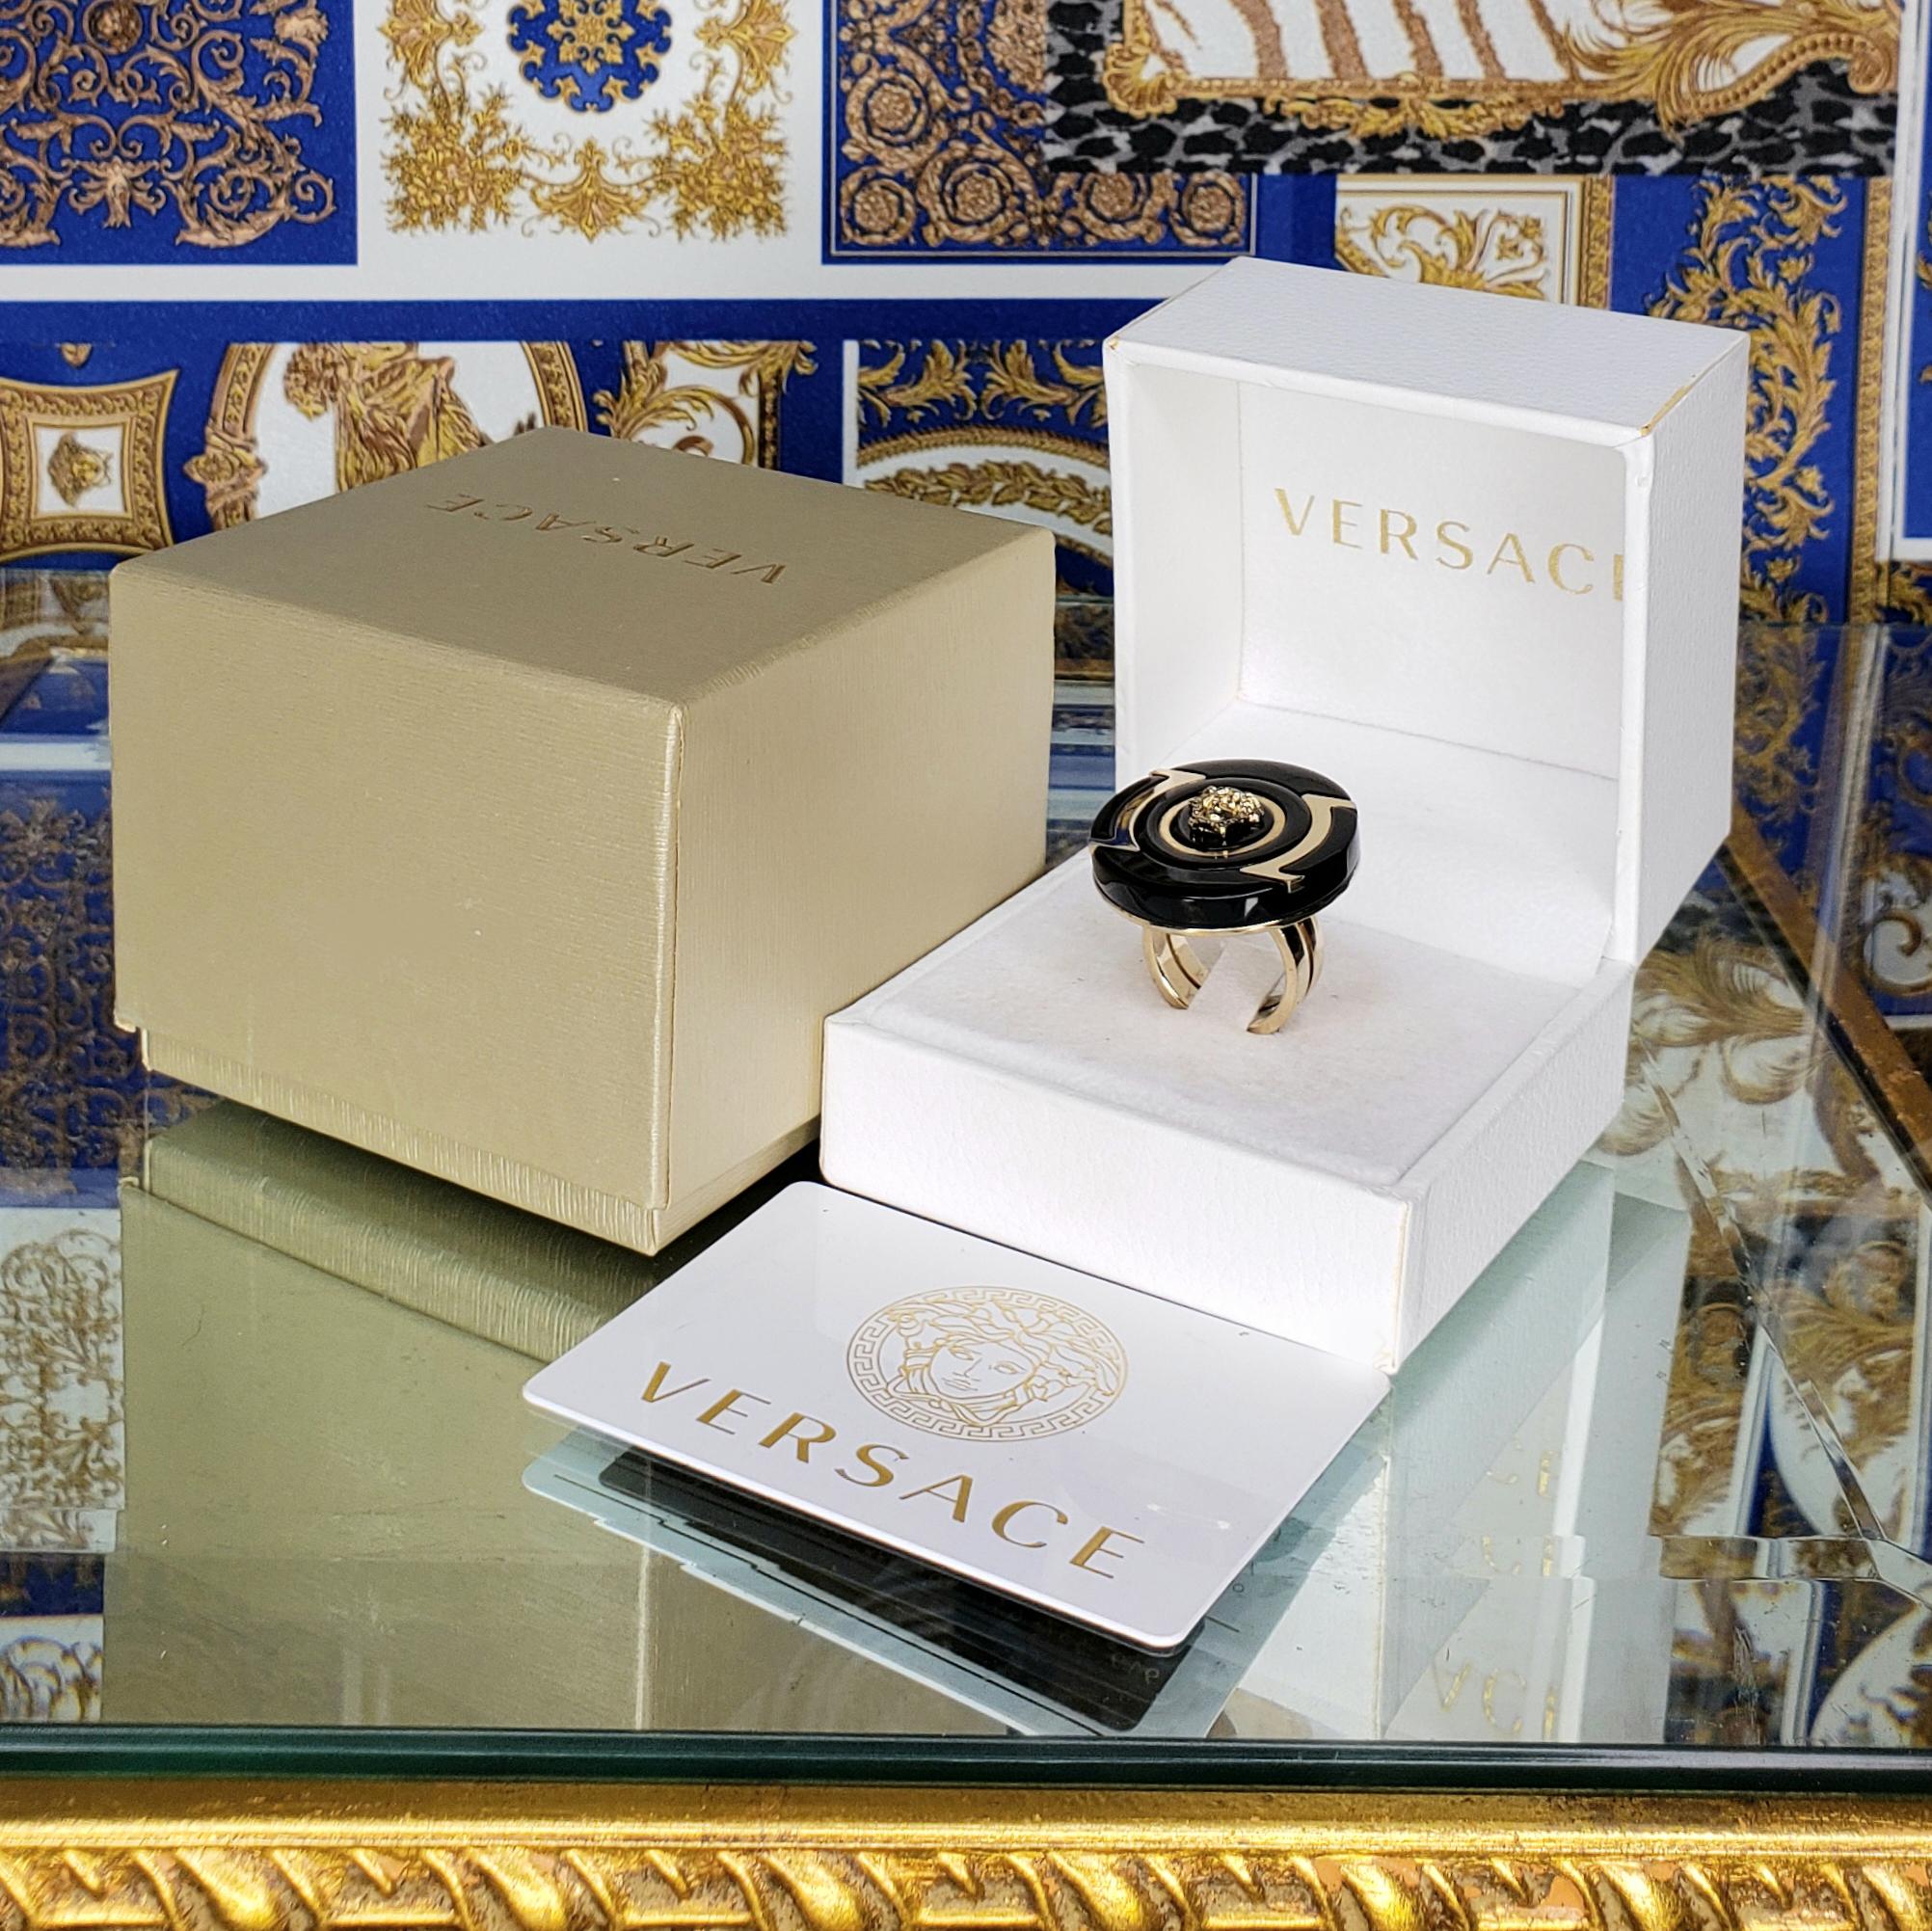   VERSACE


24K Gold Plated Medusa Ring

Black inserts 





Made in Italy



Brand new. Display model, got minor scratches.
100% authentic guarantee. Comes with Versace box.

       PLEASE VISIT OUR STORE FOR MORE GREAT ITEMS